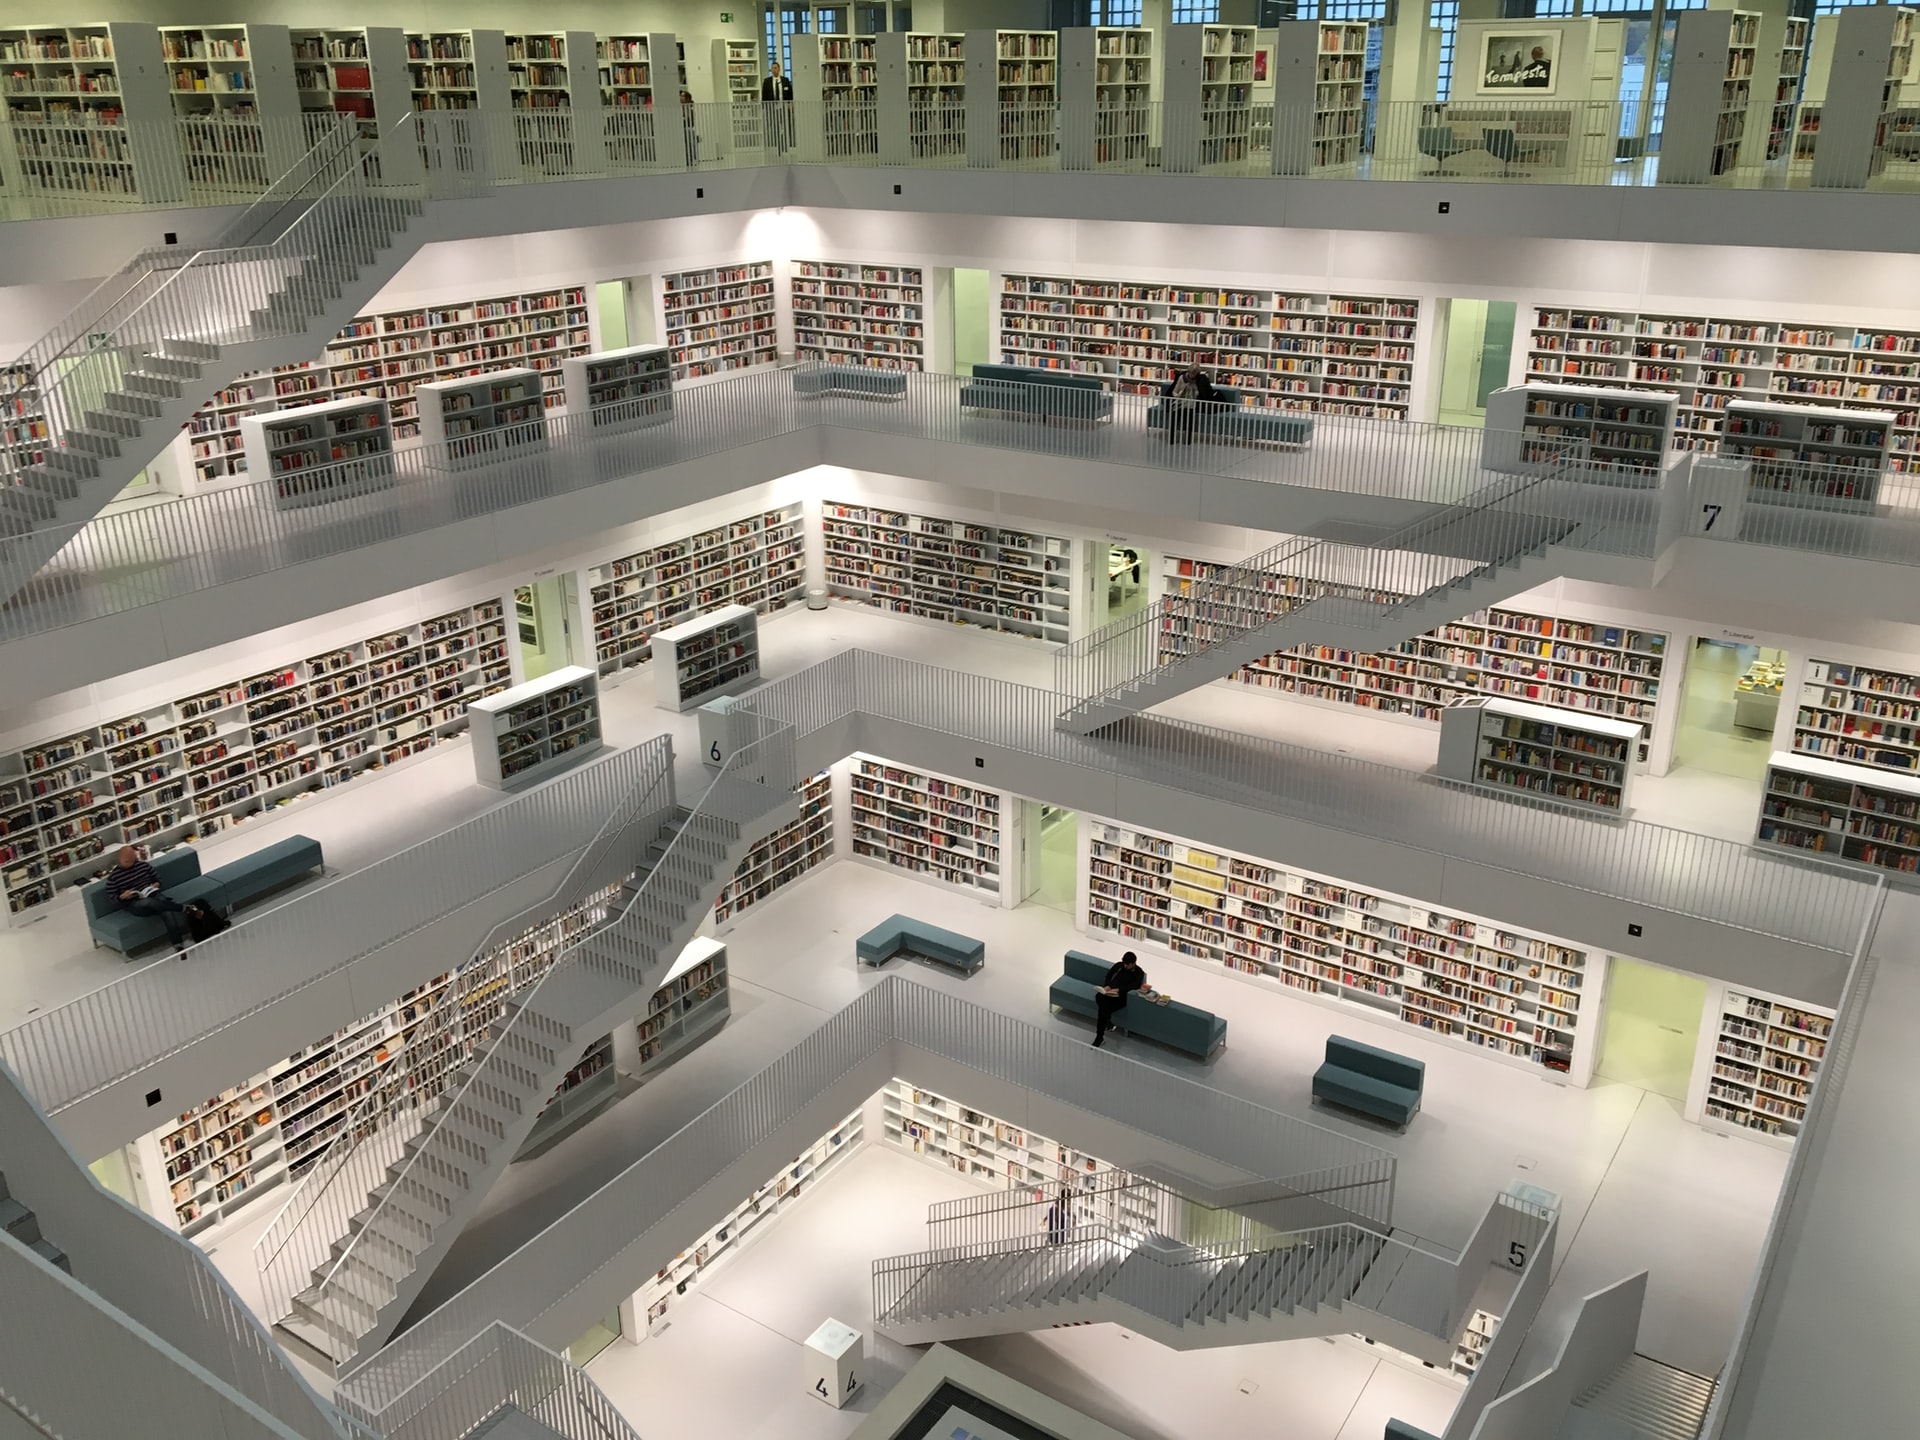 Photo of 5 story library inside looking down by Tobias Fischer on Unsplash